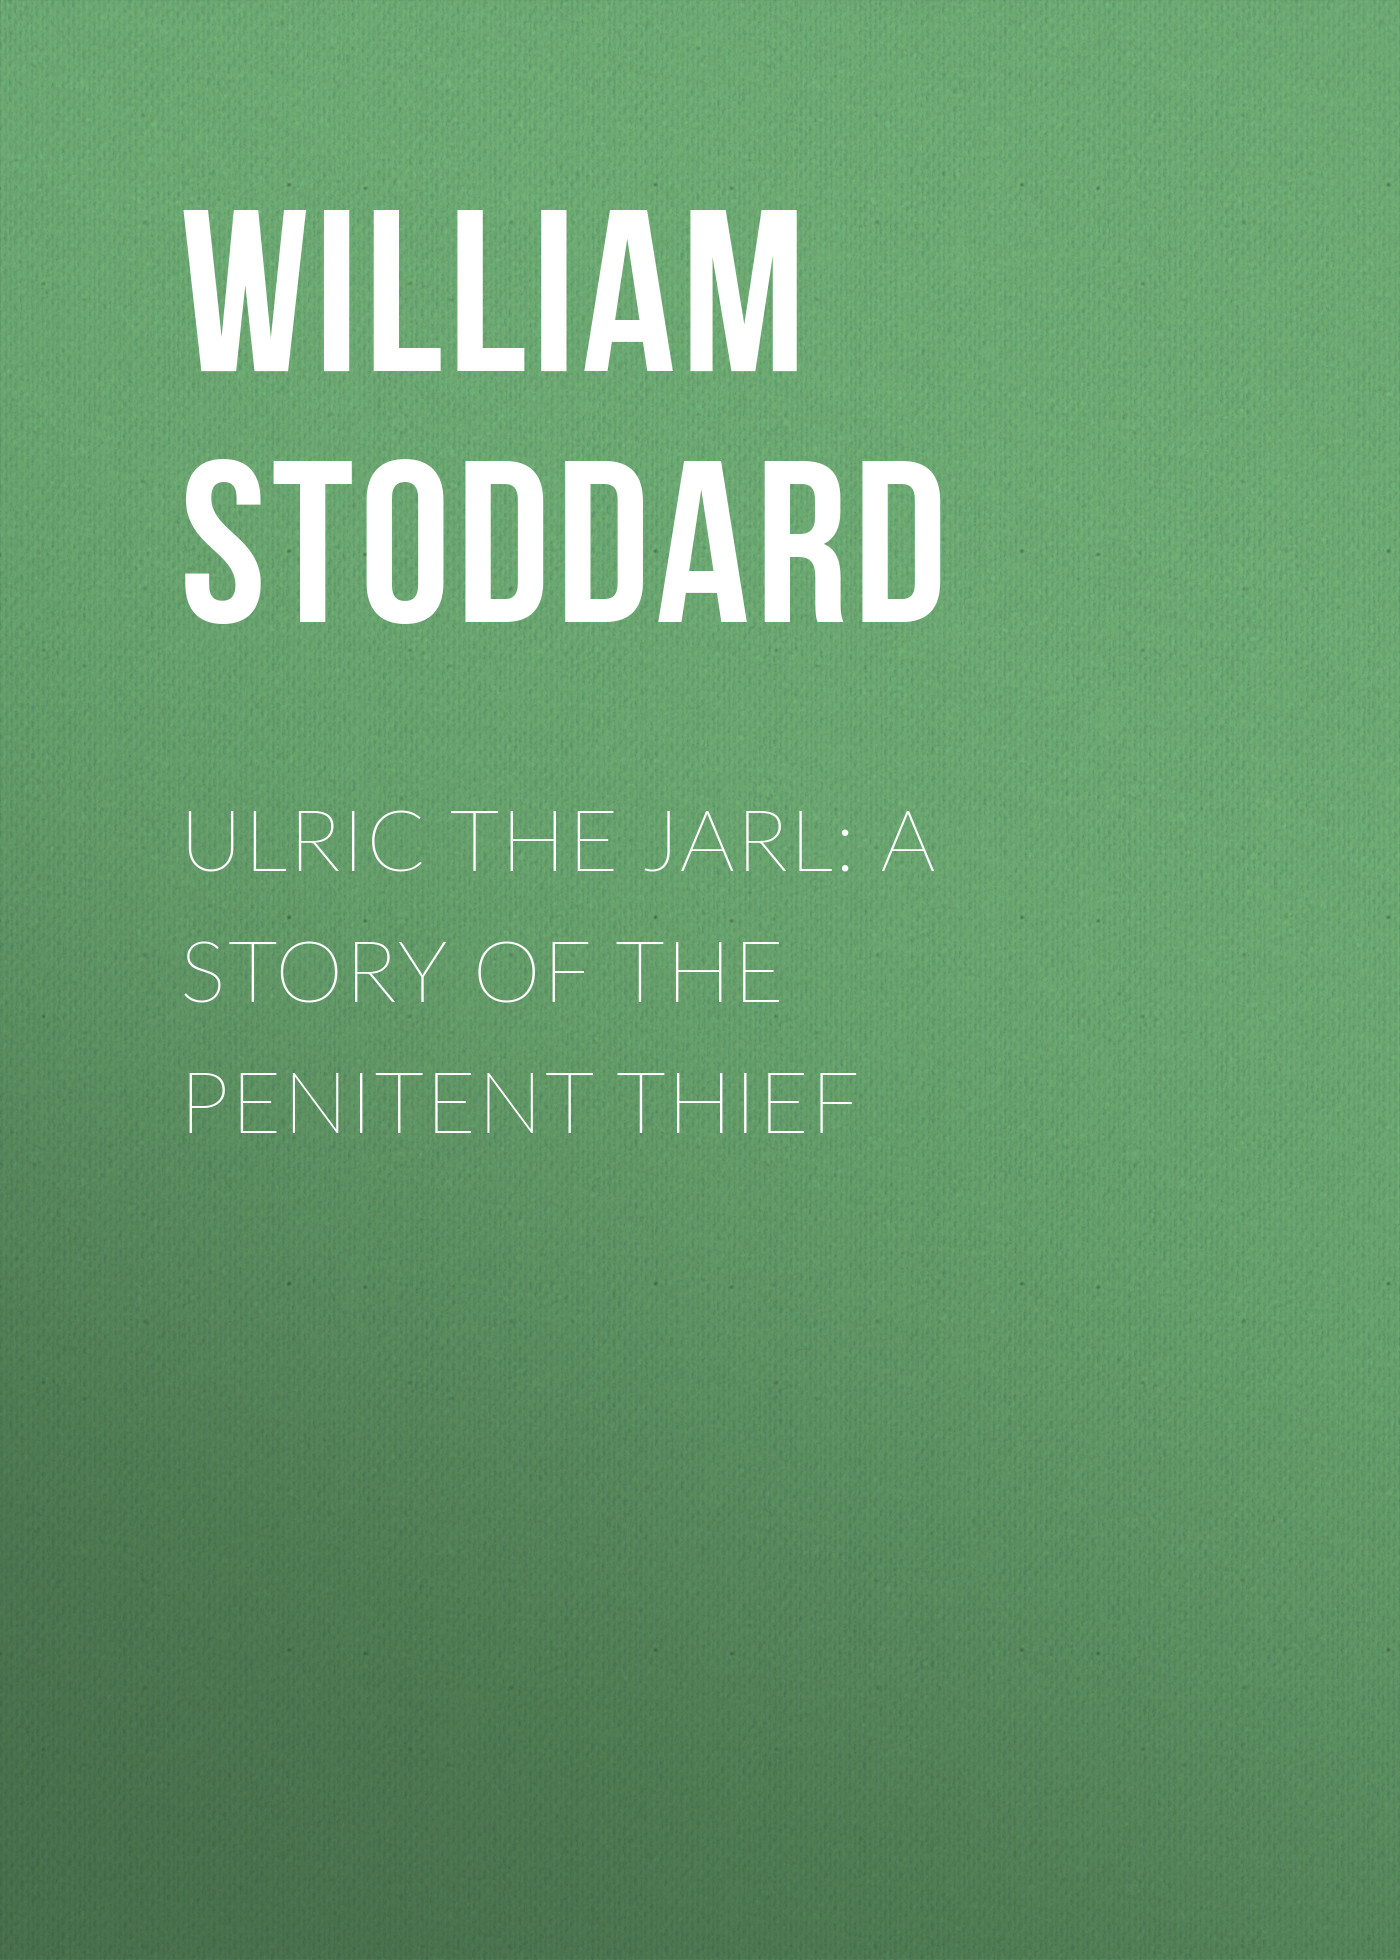 Ulric the Jarl: A Story of the Penitent Thief